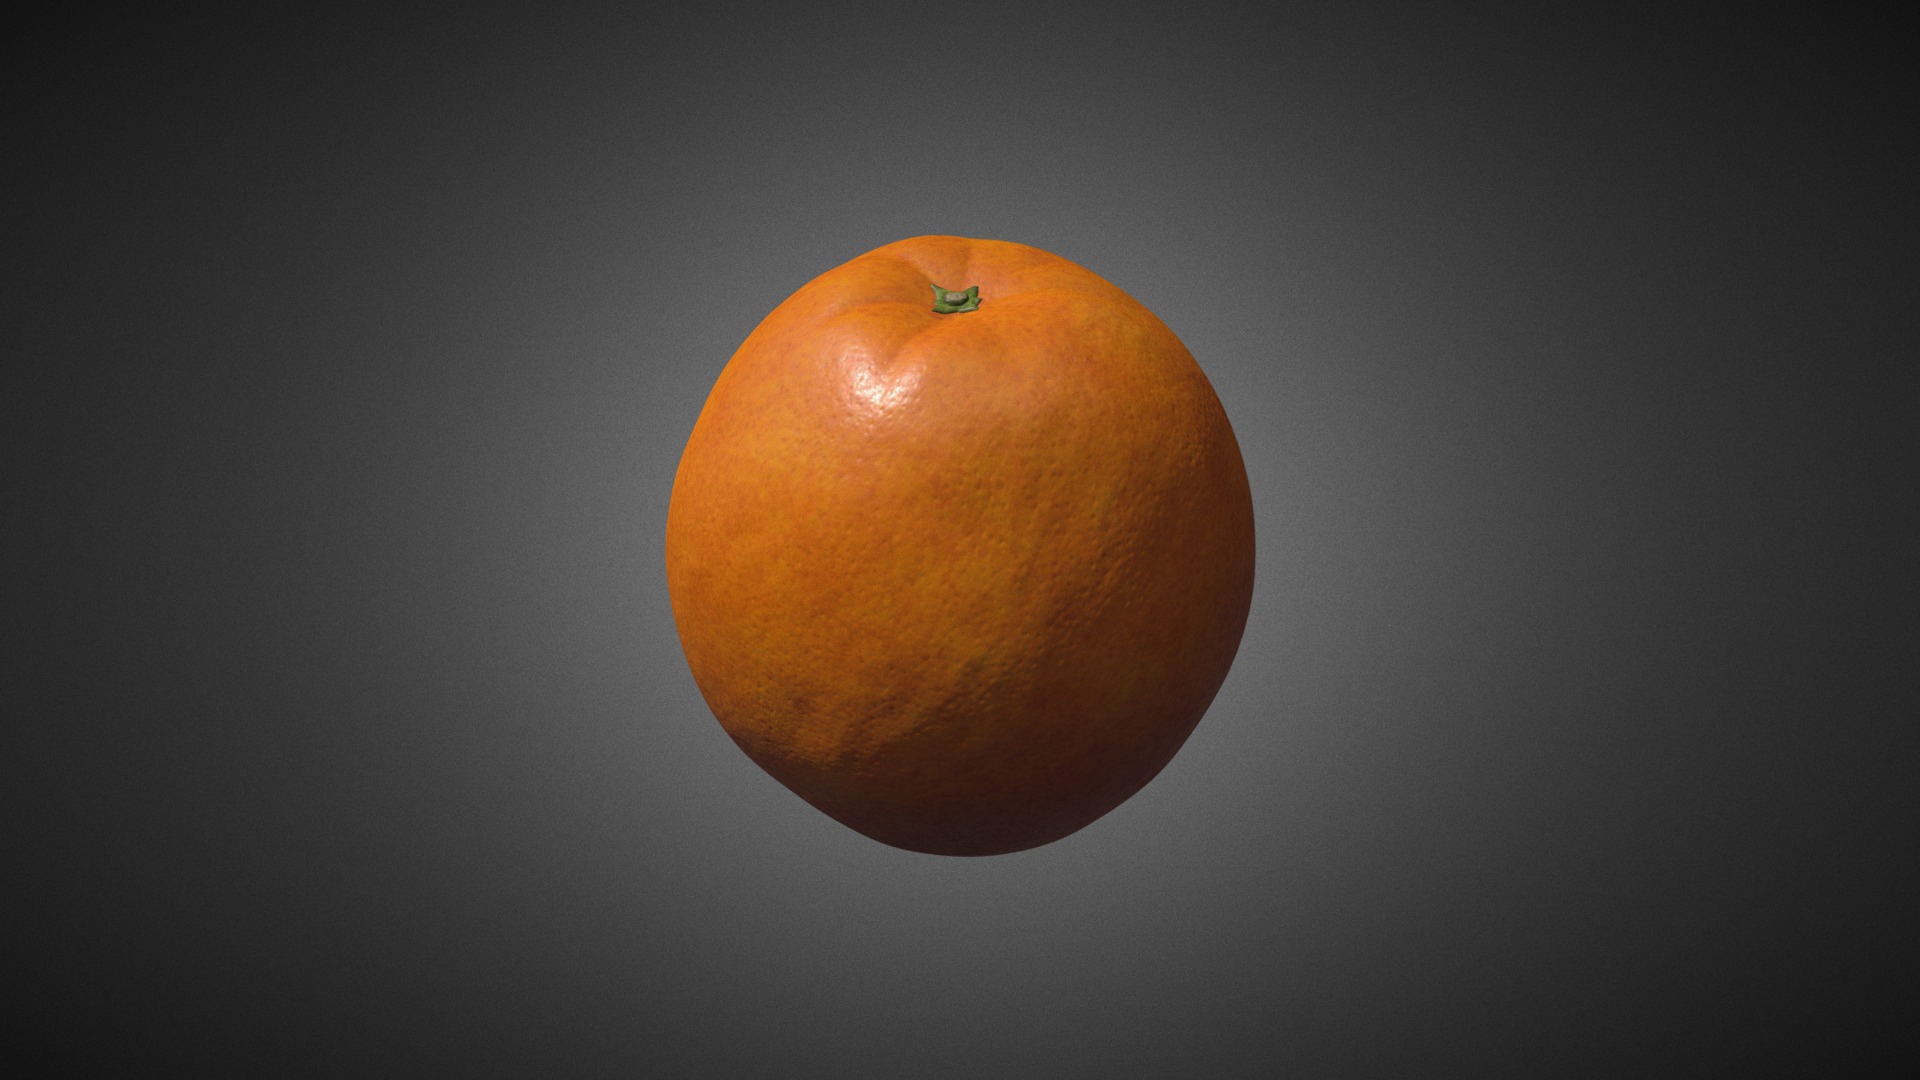 3D model Orange - This is a 3D model of the Orange. The 3D model is about an orange with a green stem.